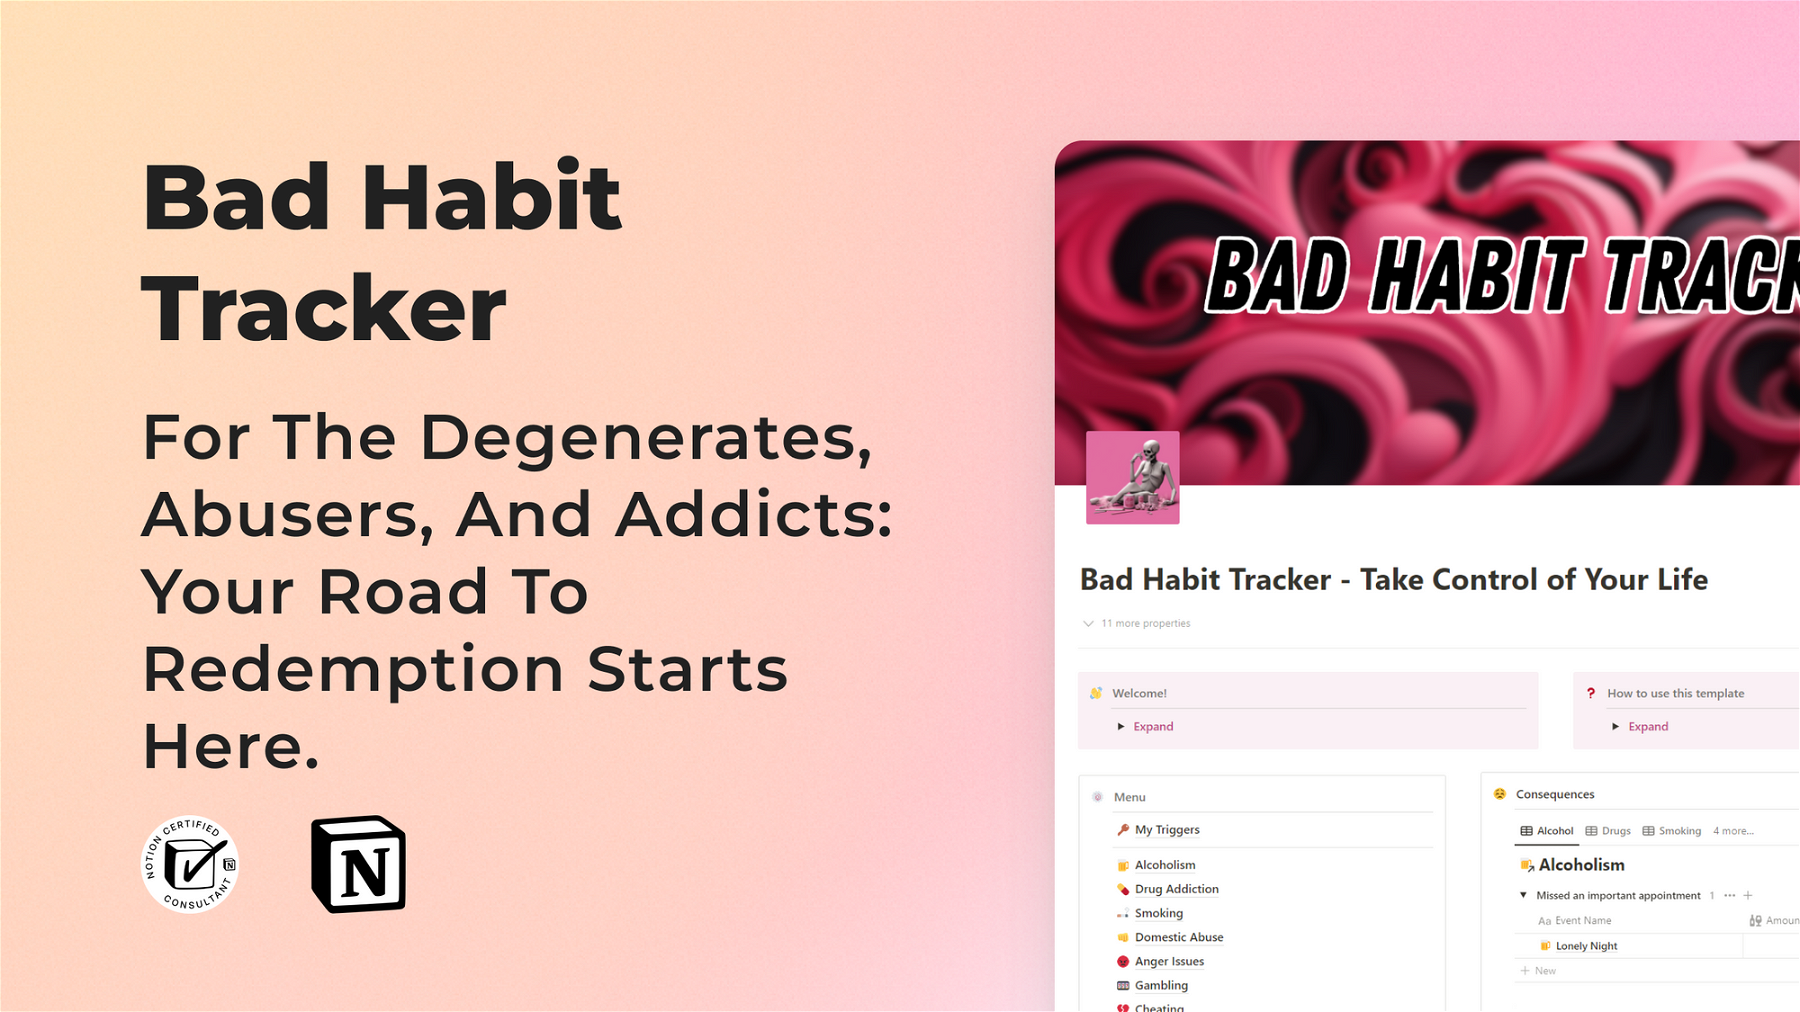 🚫 Bad Habit Tracker - Take Control of Your Life